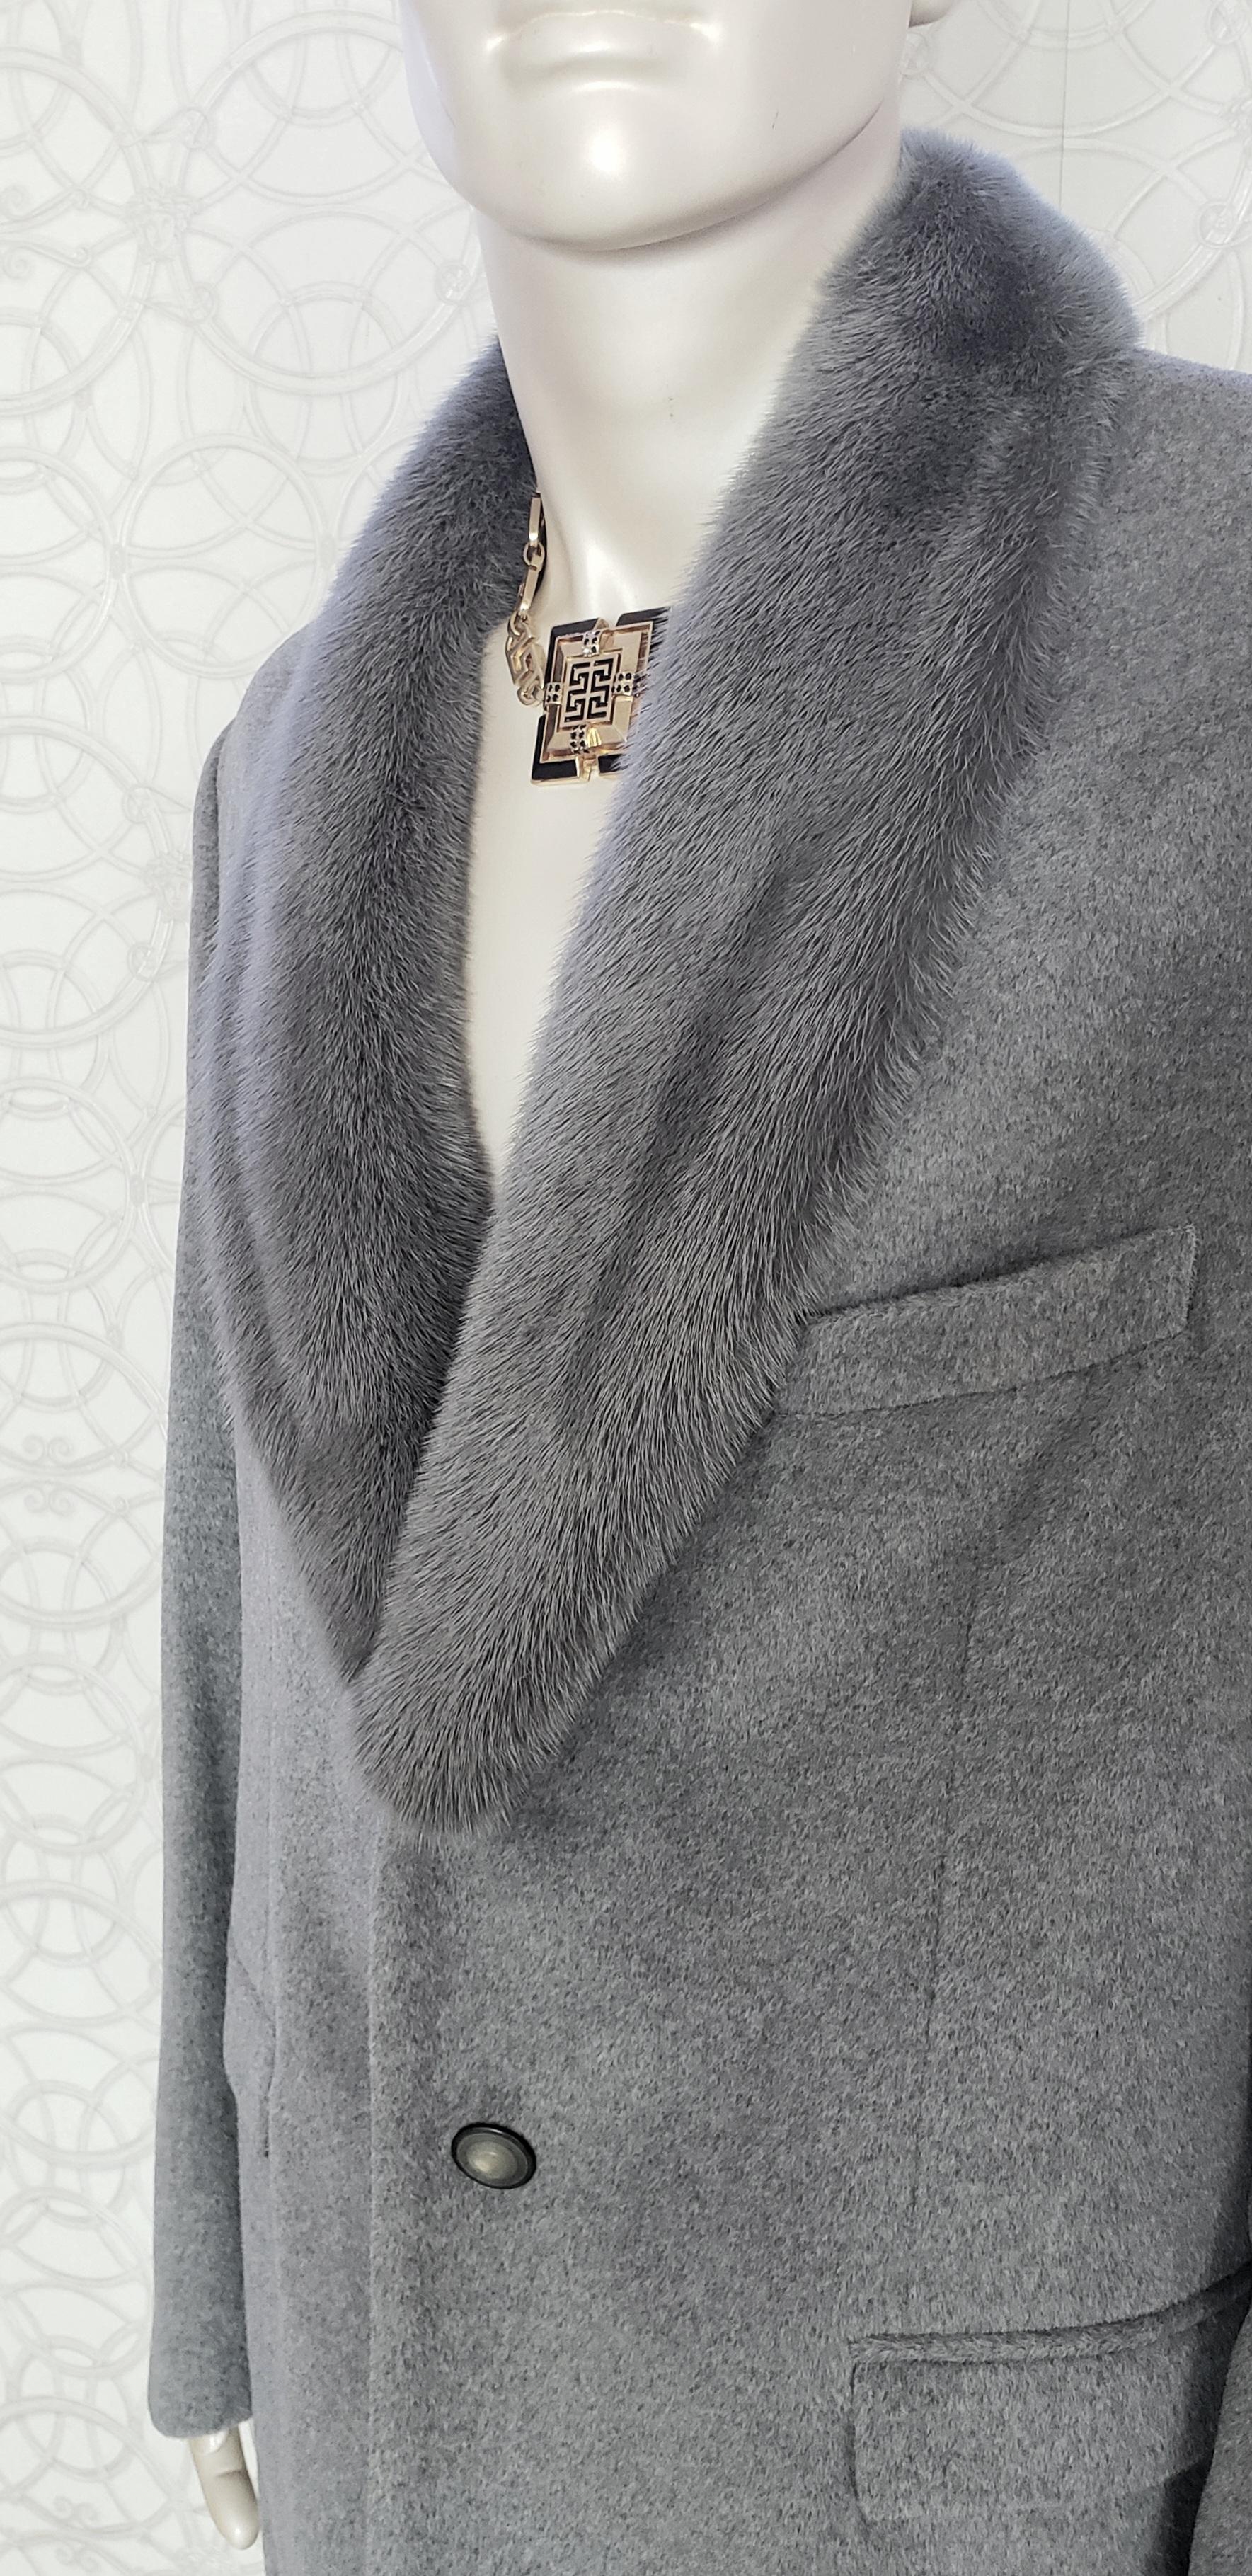 NEW VERSACE GRAY ANGORA COAT With MINK FUR COLLAR 54 - 2XL For Sale 4